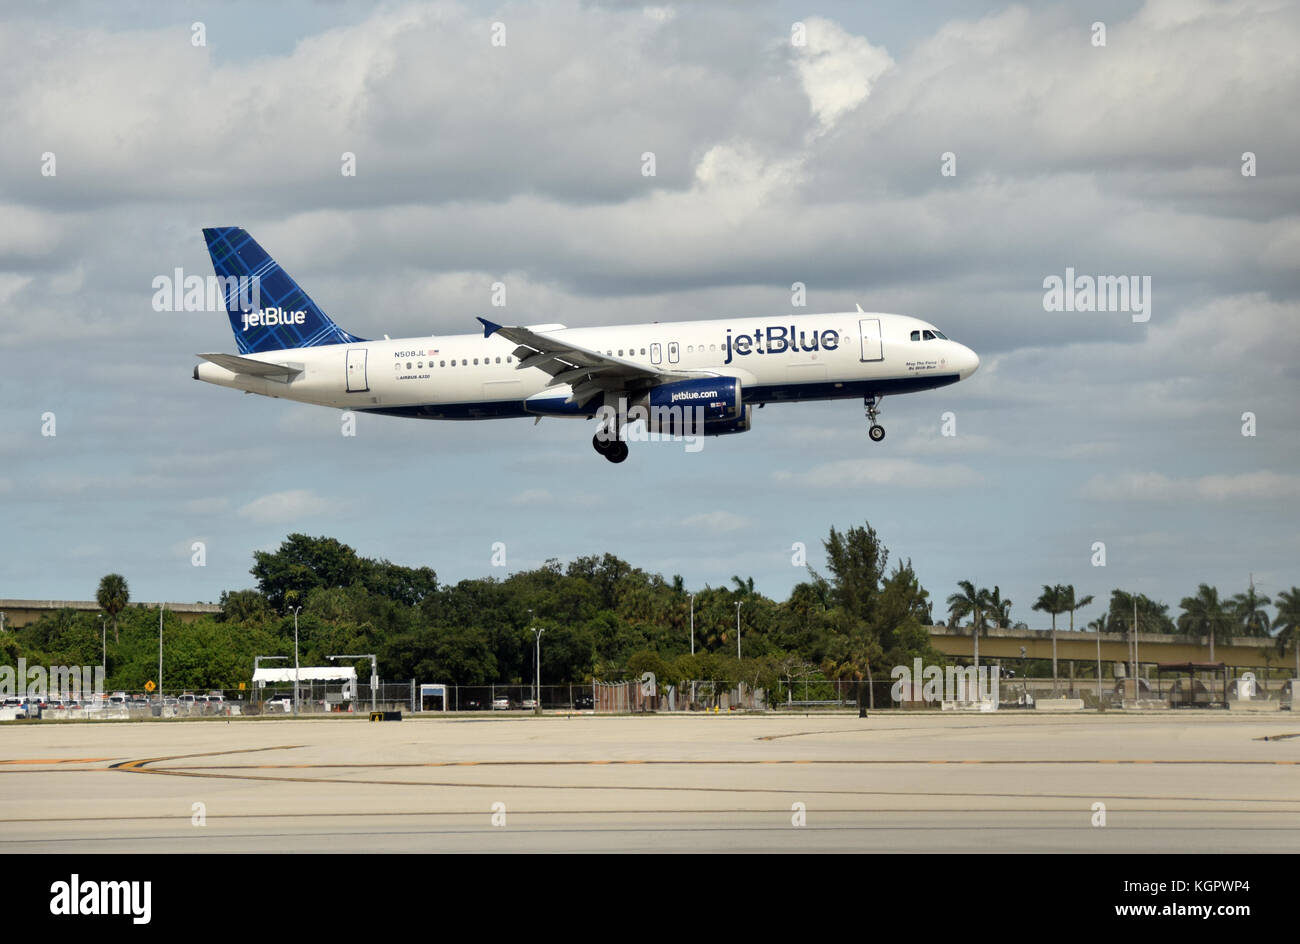 Fort Lauderdale, USA - October 17, 2015: Jetblue passenger jet airplane Airbus A-320 arrives in Fort Lauderdale from its home base in New York on Octo Stock Photo